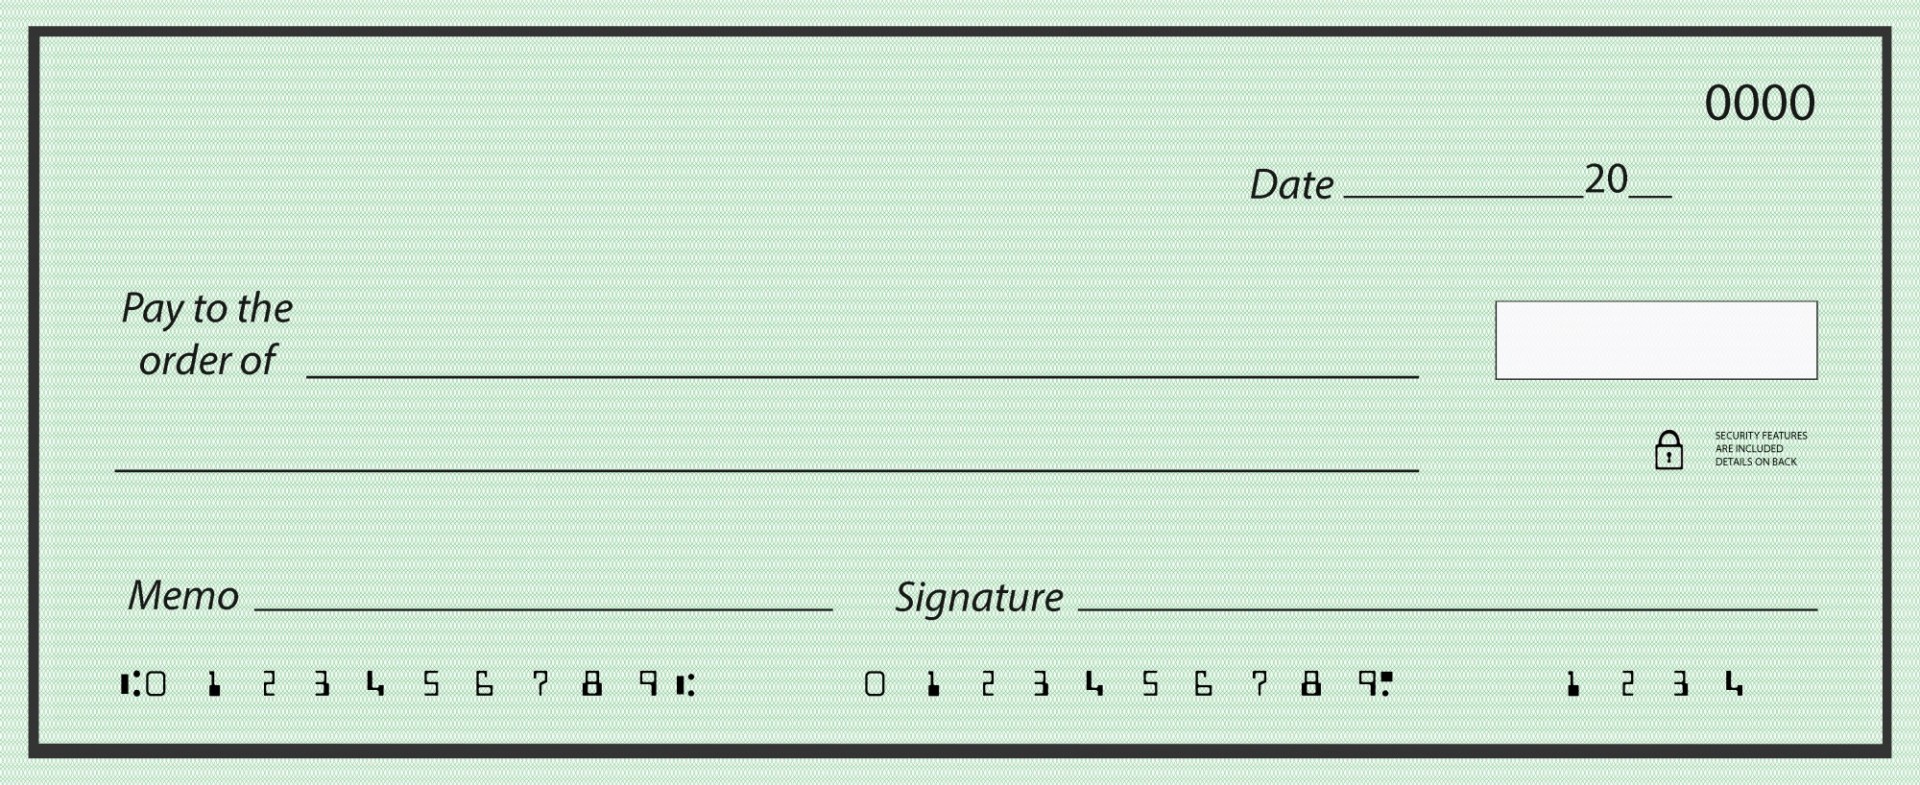 Image of a fake sample paper check showing the location of the routing and account numbers, the check number, the date, the amount box, lines for the payee, the memo line, and the signature line. 